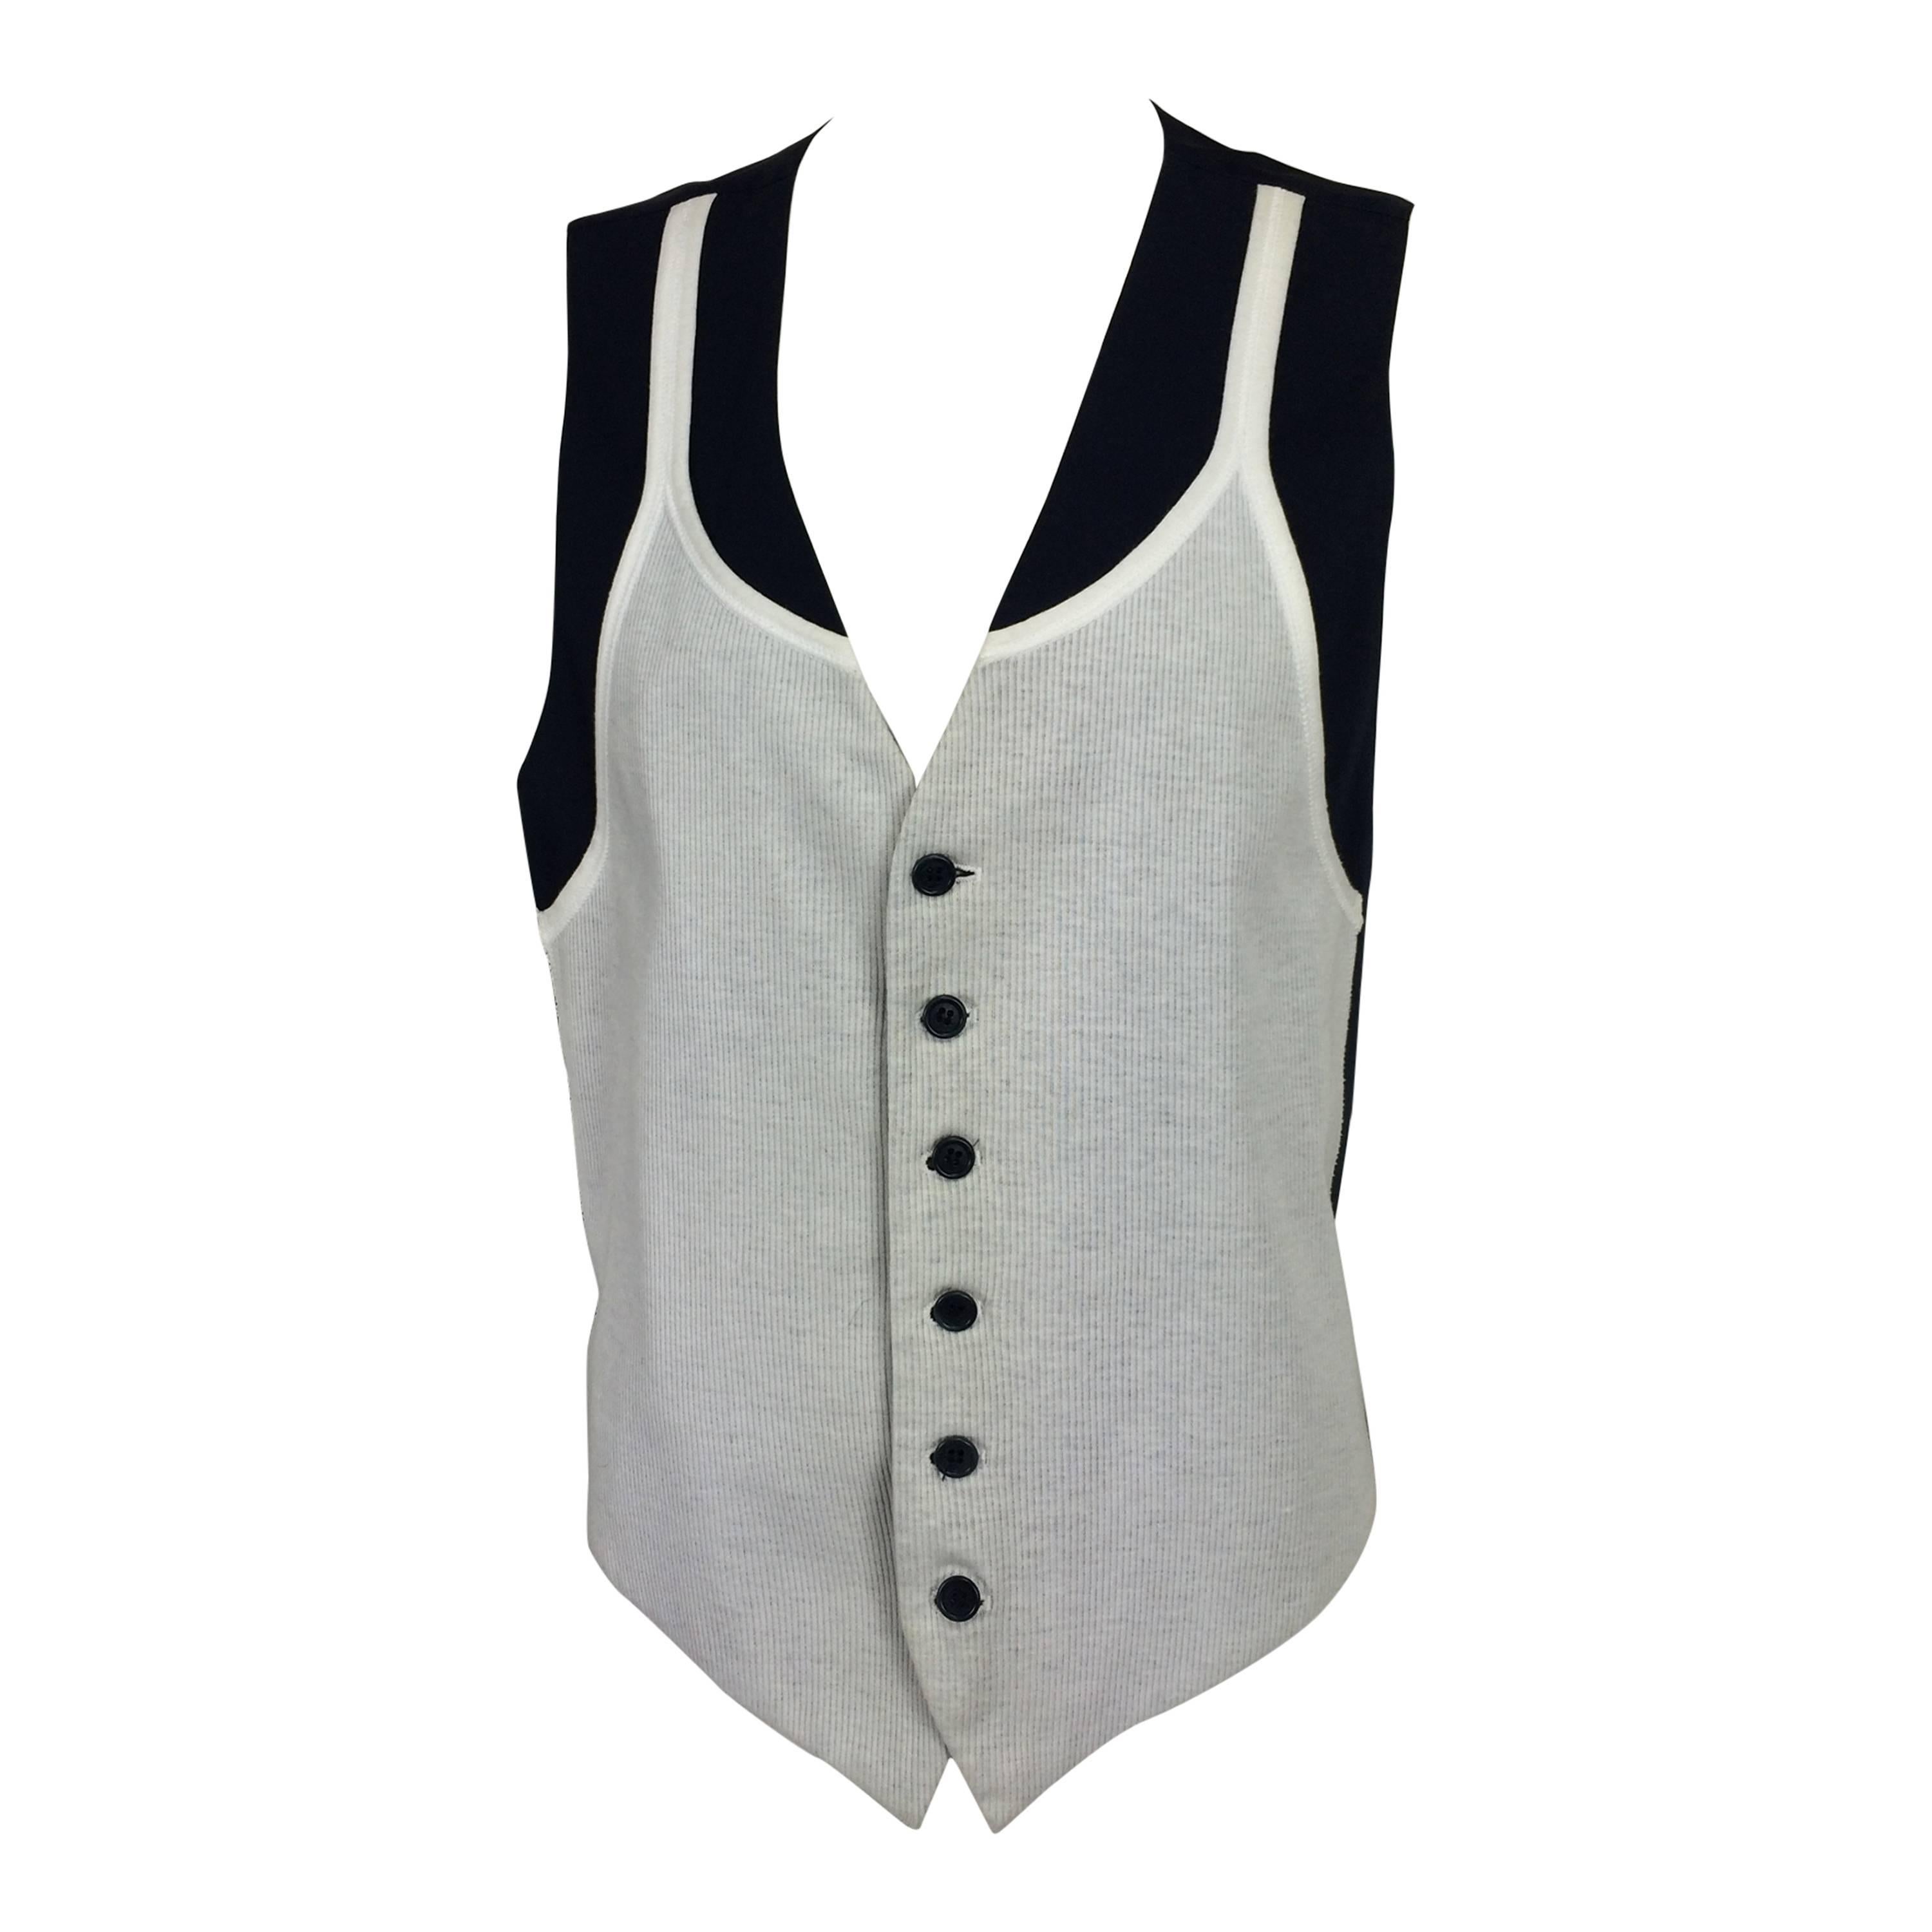 Moschino "wife beater" vest Cheap & Chic 1980s